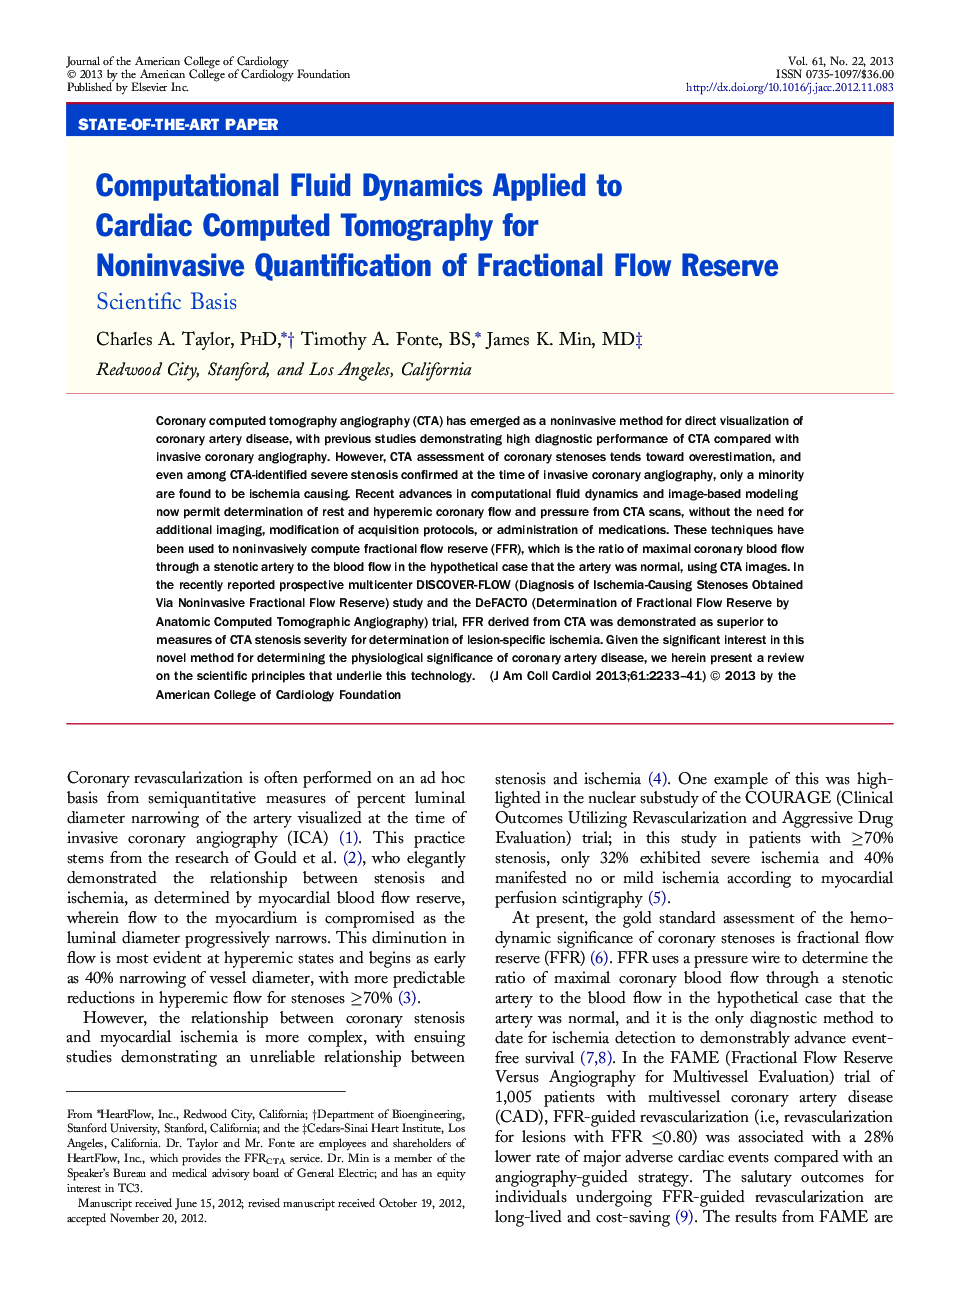 Computational Fluid Dynamics Applied to Cardiac Computed Tomography for Noninvasive Quantification of Fractional Flow Reserve : Scientific Basis